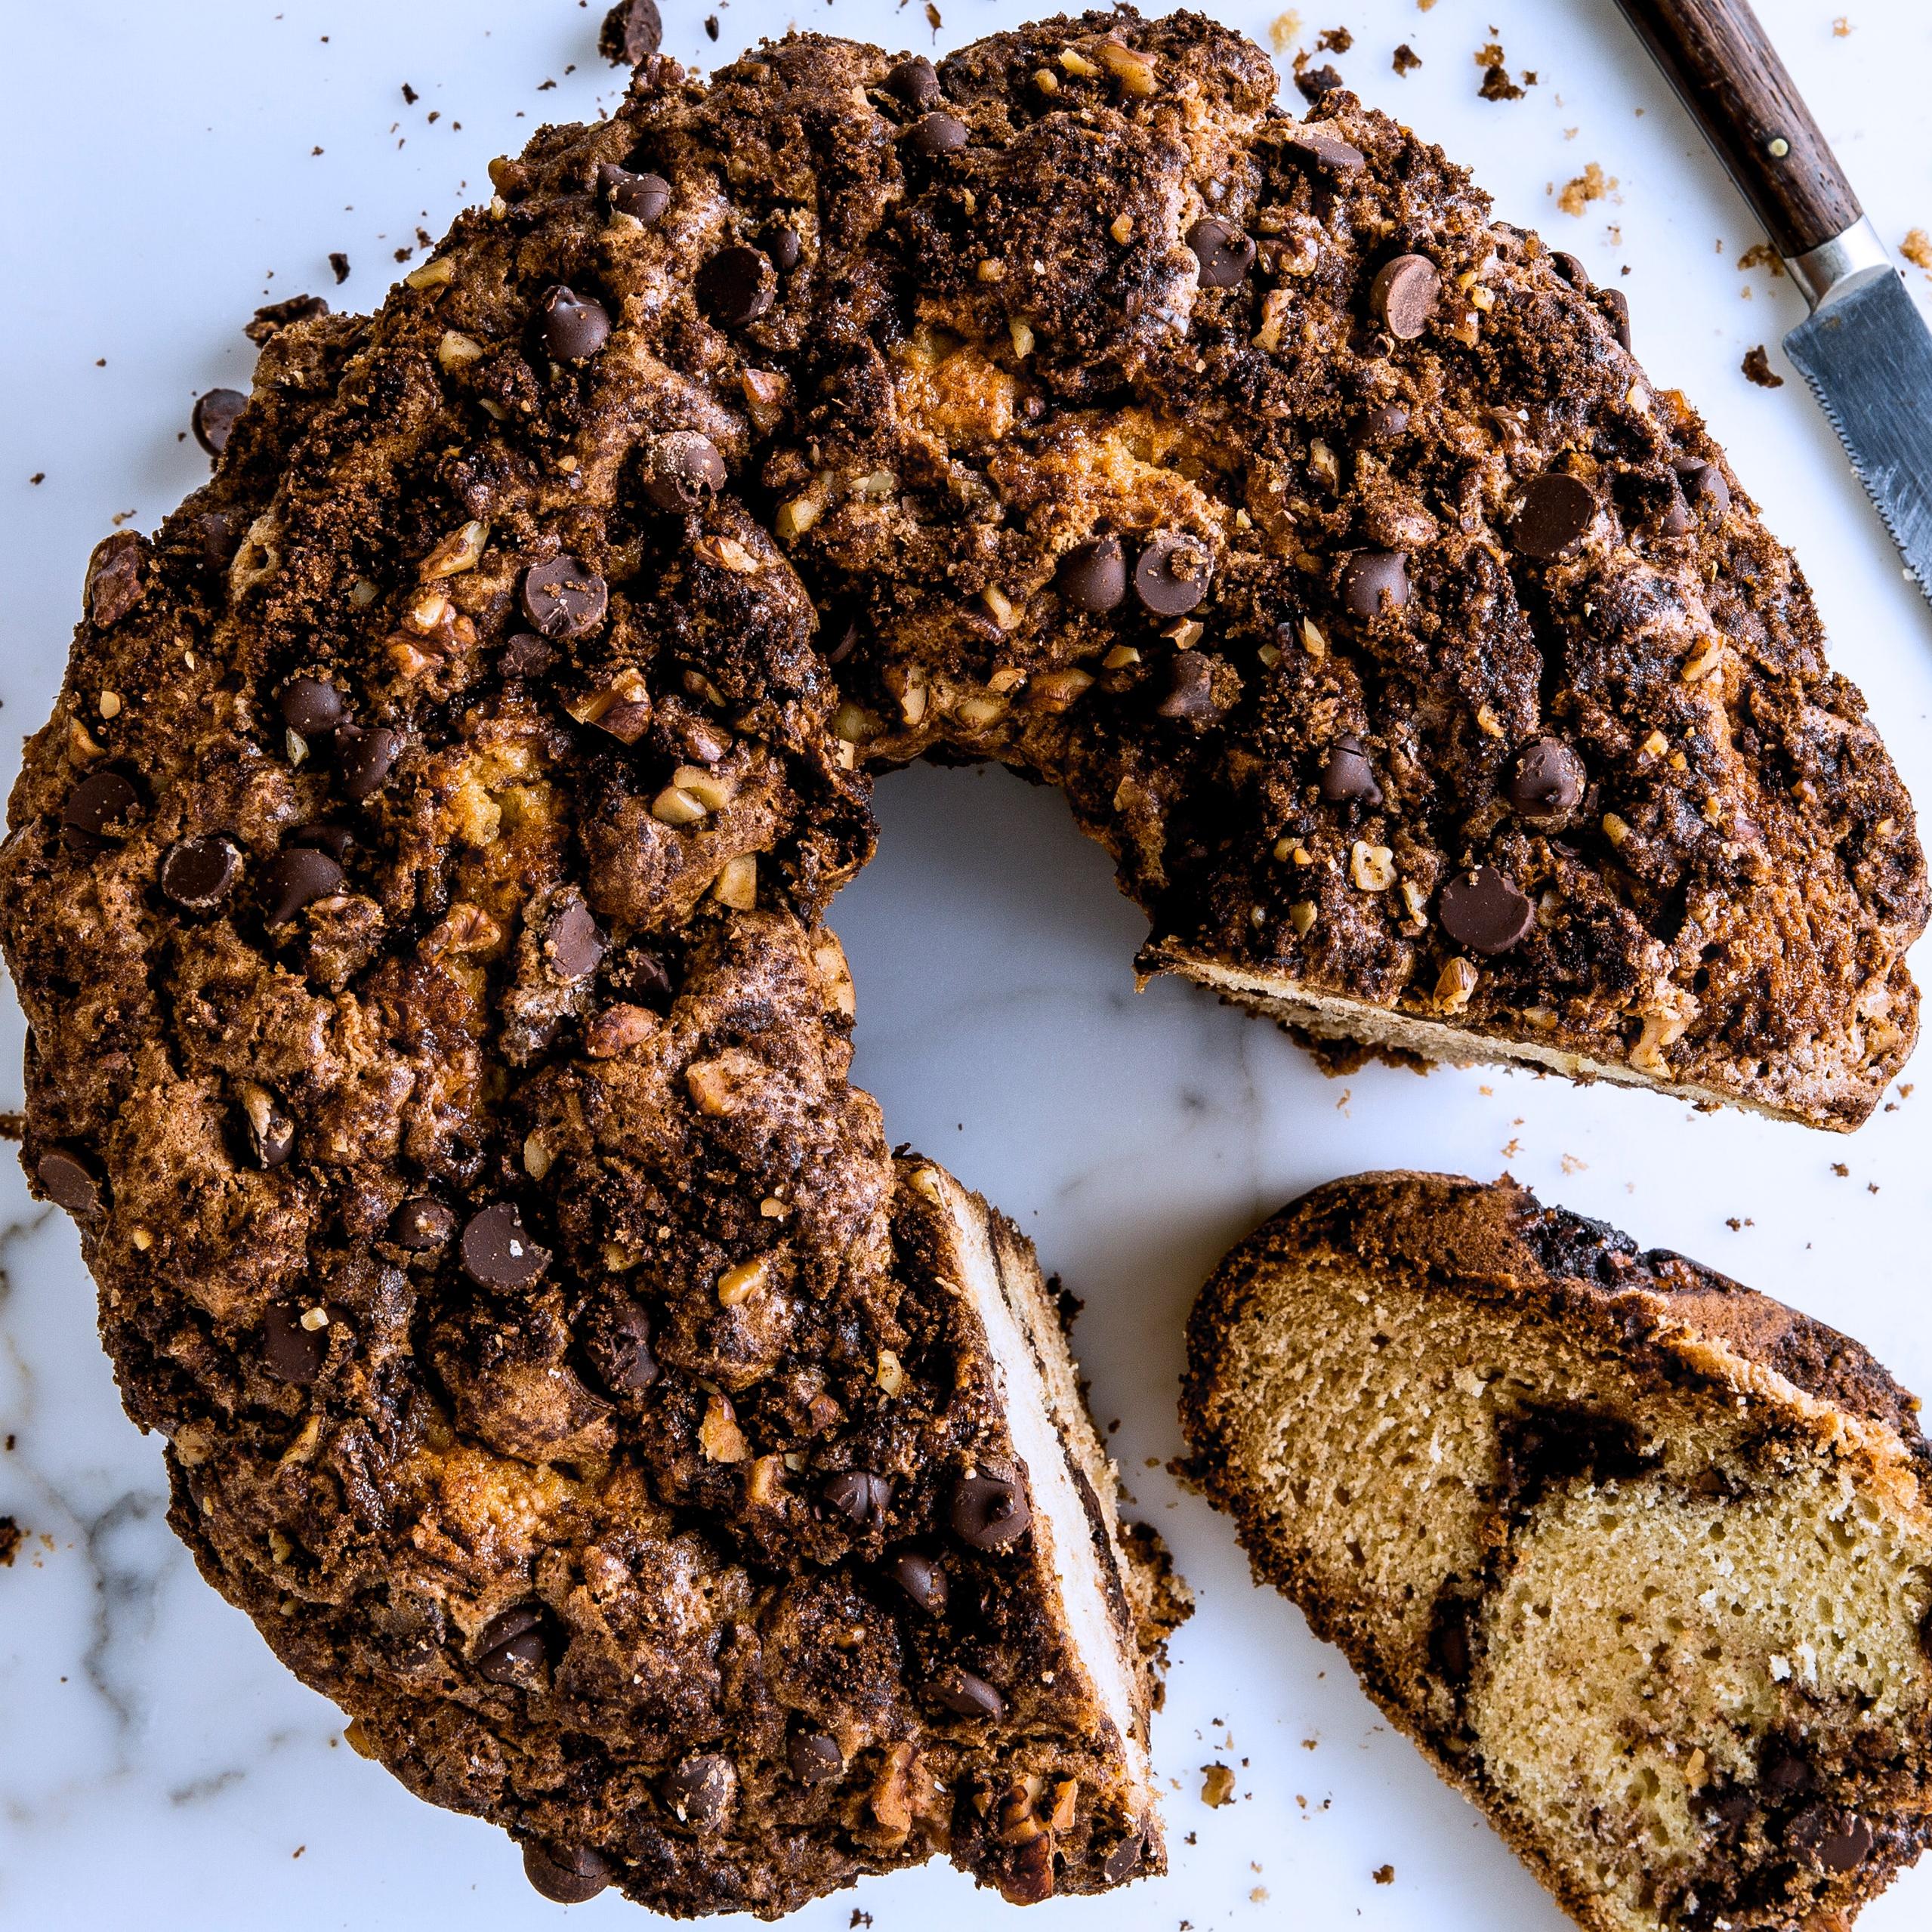  Get ready to indulge in this chocolate nut coffee cake.